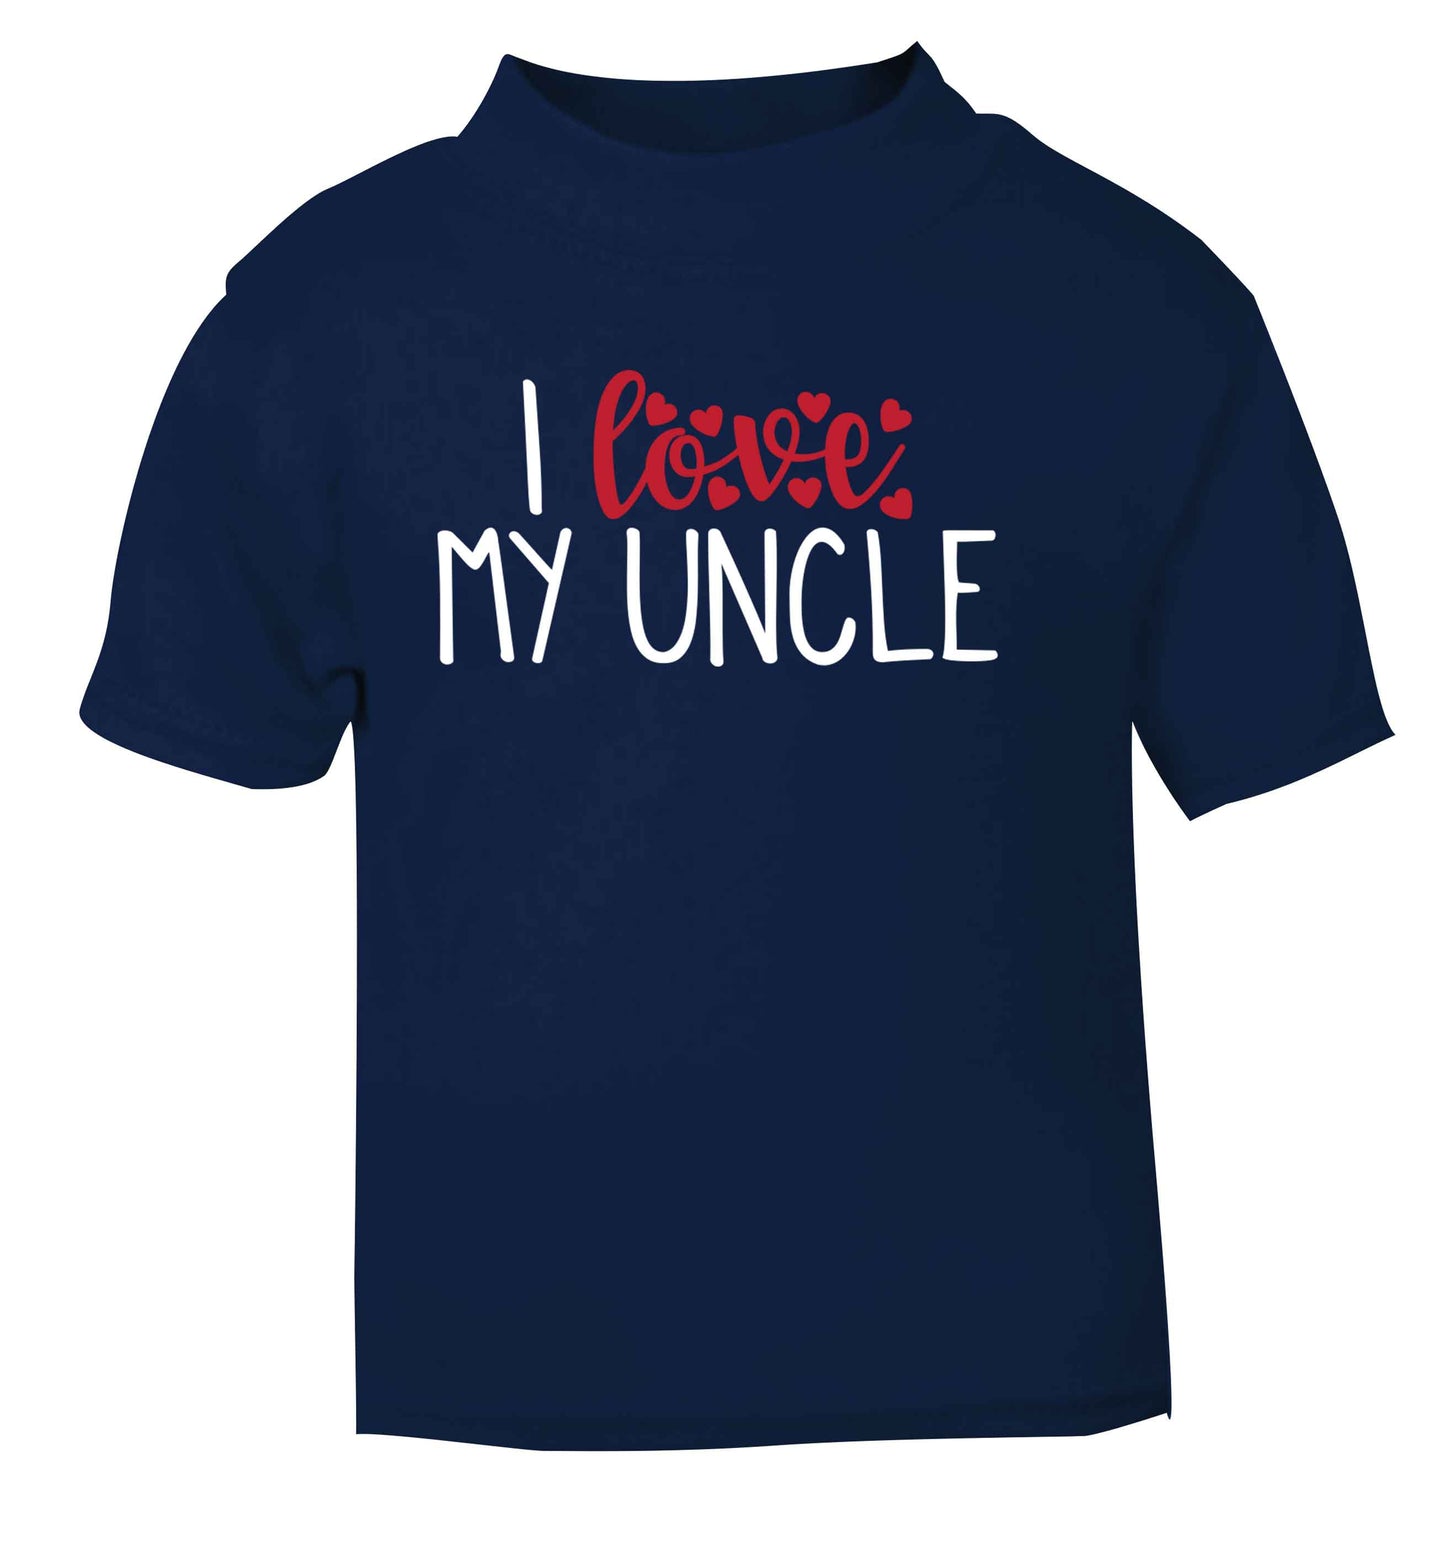 I love my uncle navy Baby Toddler Tshirt 2 Years